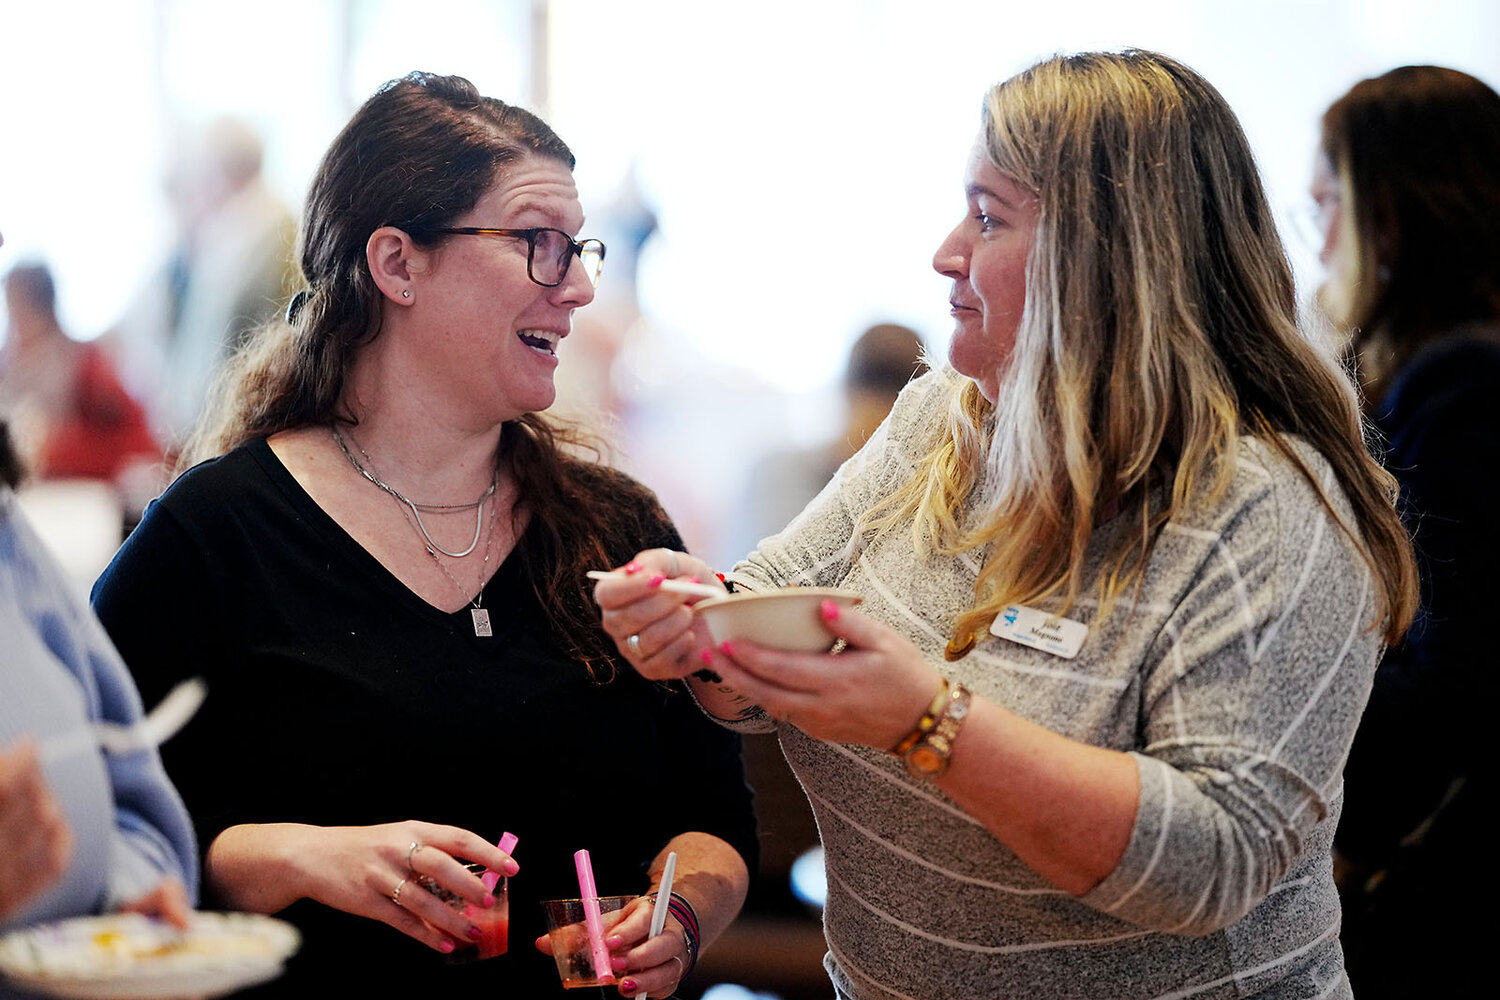 Trying out the foods at the event are Marisa Kranz, left, and Joie Magnone, right, both of Warwick.